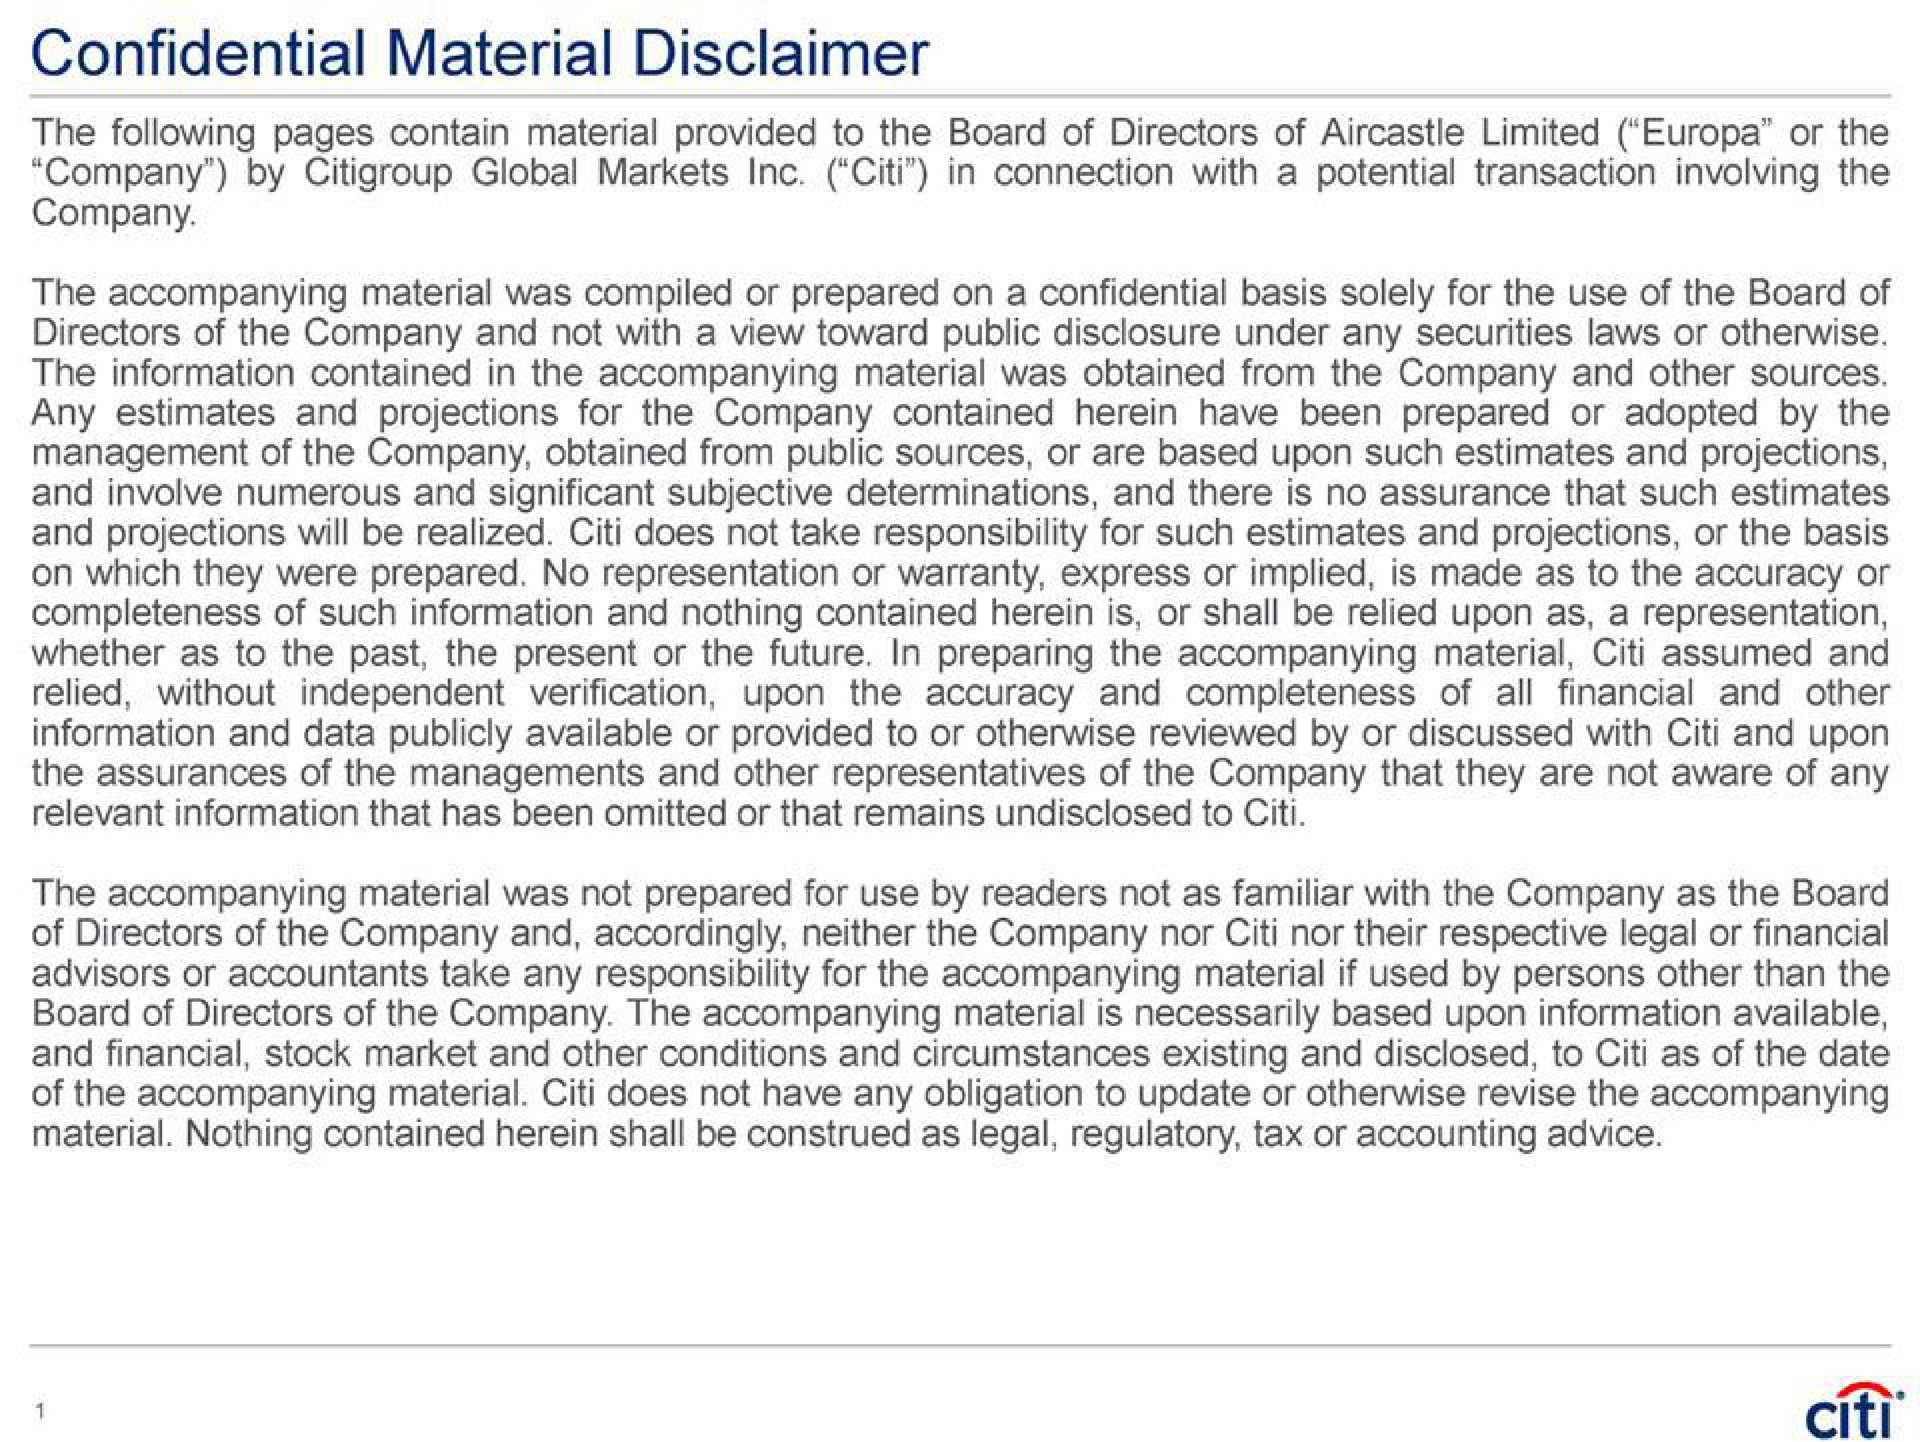 confidential material disclaimer the following pages contain material provided to the board of directors of limited or the in connection with a potential transaction involving the company by global markets company the accompanying material was compiled or prepared on a confidential basis solely for the use of the board of directors of the company and not with a view toward public disclosure under any securities laws or otherwise the information contained in the accompanying material was obtained from the company and other sources any estimates and projections for the company contained herein have been prepared or adopted by the management of the company obtained from public sources or are based upon such estimates and projections and involve numerous and significant subjective determinations and there is no assurance that such estimates and projections will be realized does not take responsibility for such estimates and projections or the basis on which they were prepared no representation or warranty express or implied is made as to the accuracy or completeness of such information and nothing contained herein is or shall be relied upon as a representation whether as to the past the present or the future in preparing the accompanying material assumed and all financial and other relied without independent verification upon the accuracy and completeness of information and data publicly available or provided to or otherwise reviewed by or discussed with and upon the assurances of the managements and other representatives of the company that they are not aware of any relevant information that has been omitted or that remains undisclosed to the accompanying material was not prepared for use by readers not as familiar with the company as the board of directors of the company and accordingly neither the company nor nor their respective legal or financial advisors or accountants take any responsibility for the accompanying material if used by persons other than the board of directors of the company the accompanying material is necessarily based upon information available and financial stock market and other conditions and circumstances existing and disclosed to as of the date of the accompanying material does not have any obligation to update or otherwise revise the accompanying material nothing contained herein shall be construed as legal regulatory tax or accounting advice | Citi